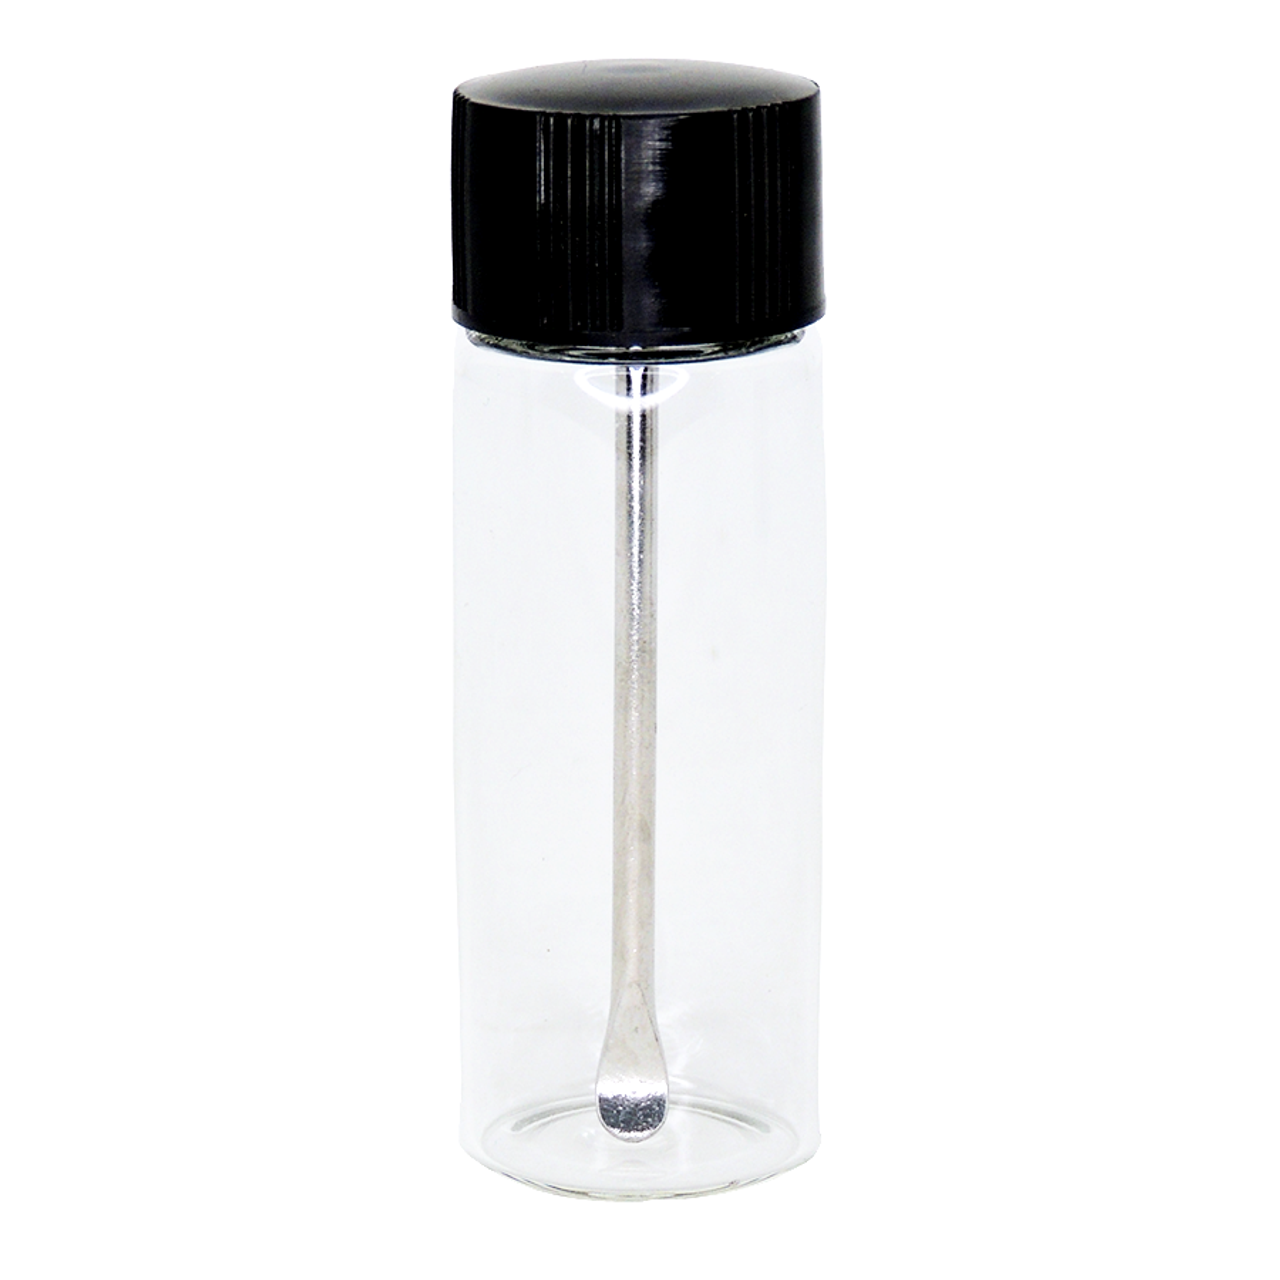 Bottle with Scooper - Assorted Colors